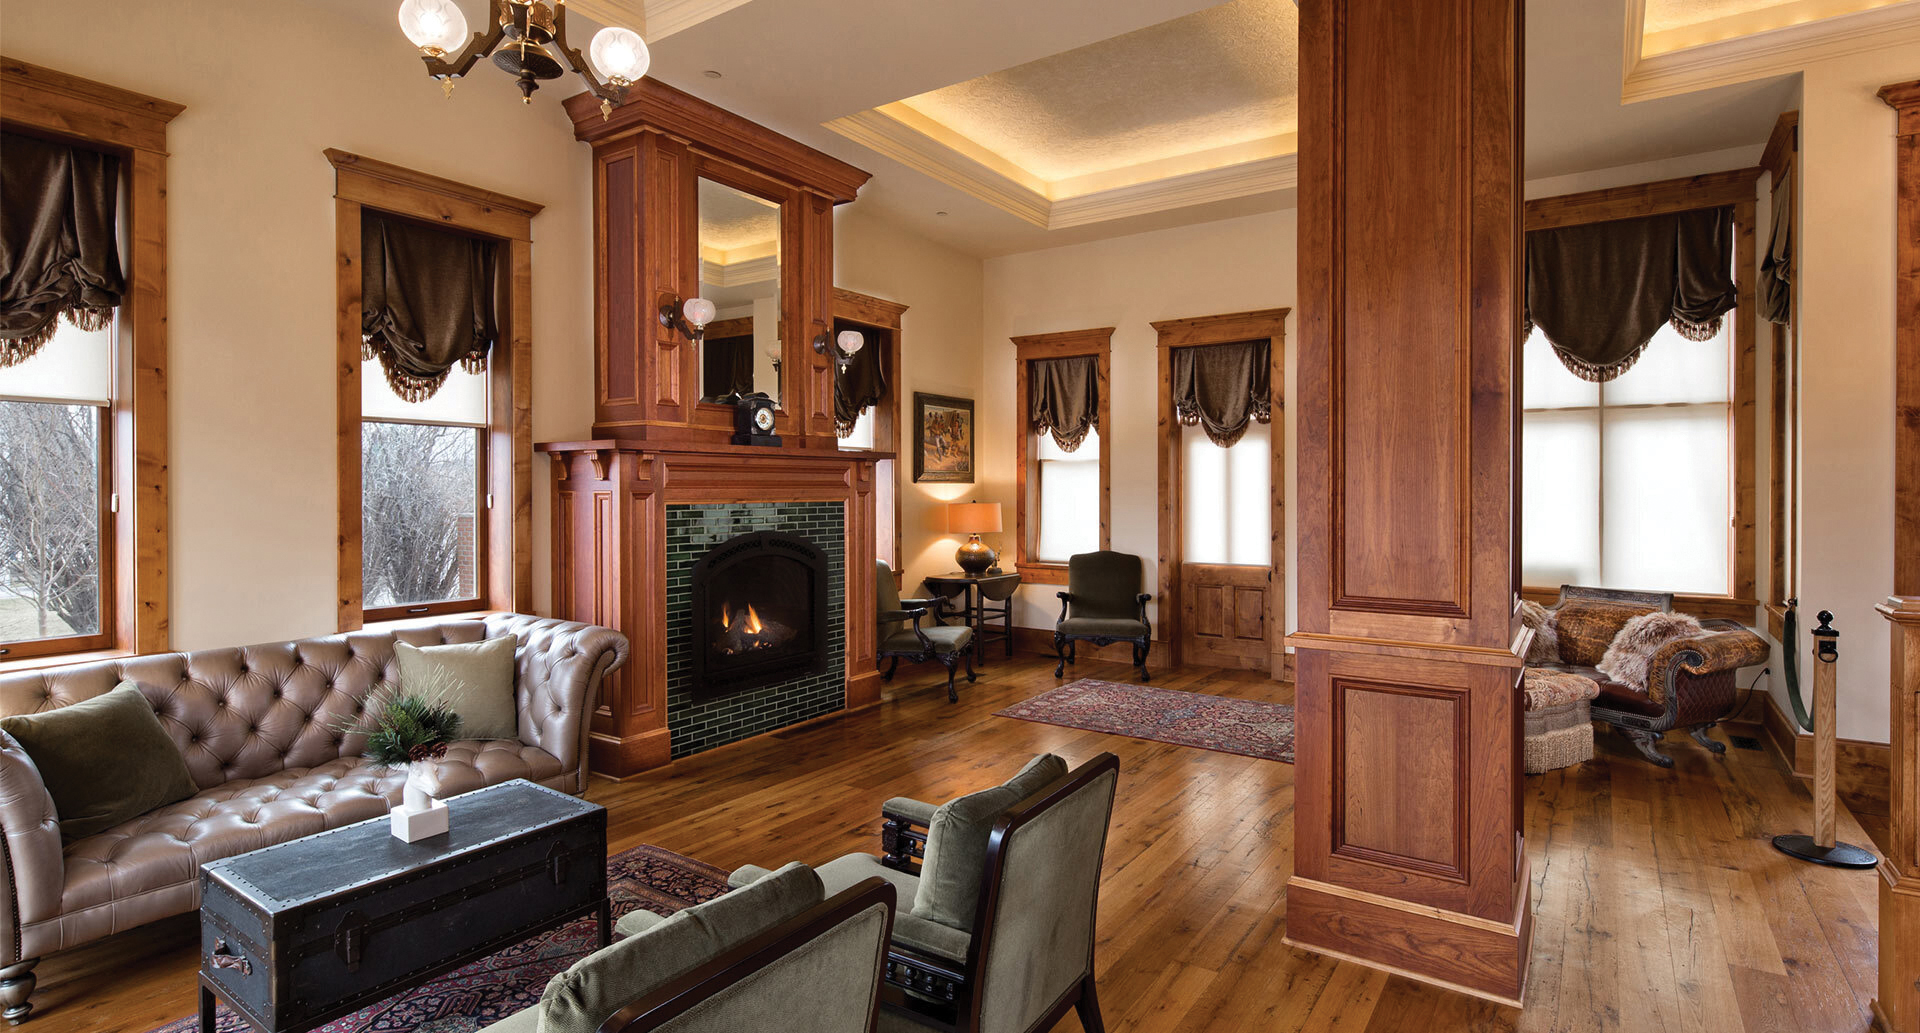 Inside the Kleeman House, owned by Keating Resources.